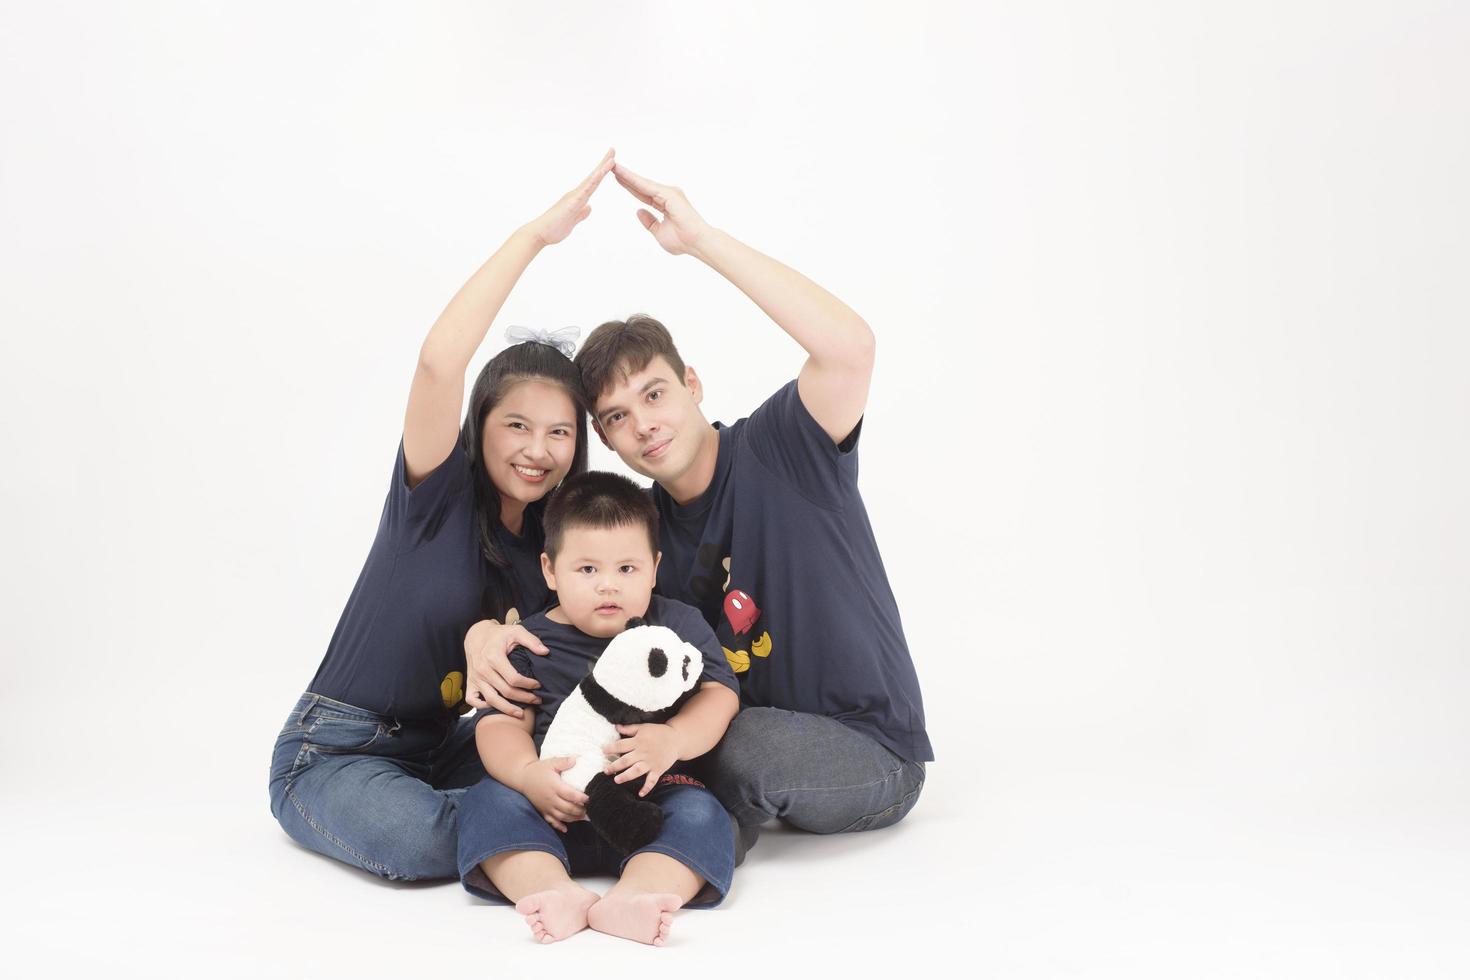 Happy Family portrait on white background, Home safety concept photo